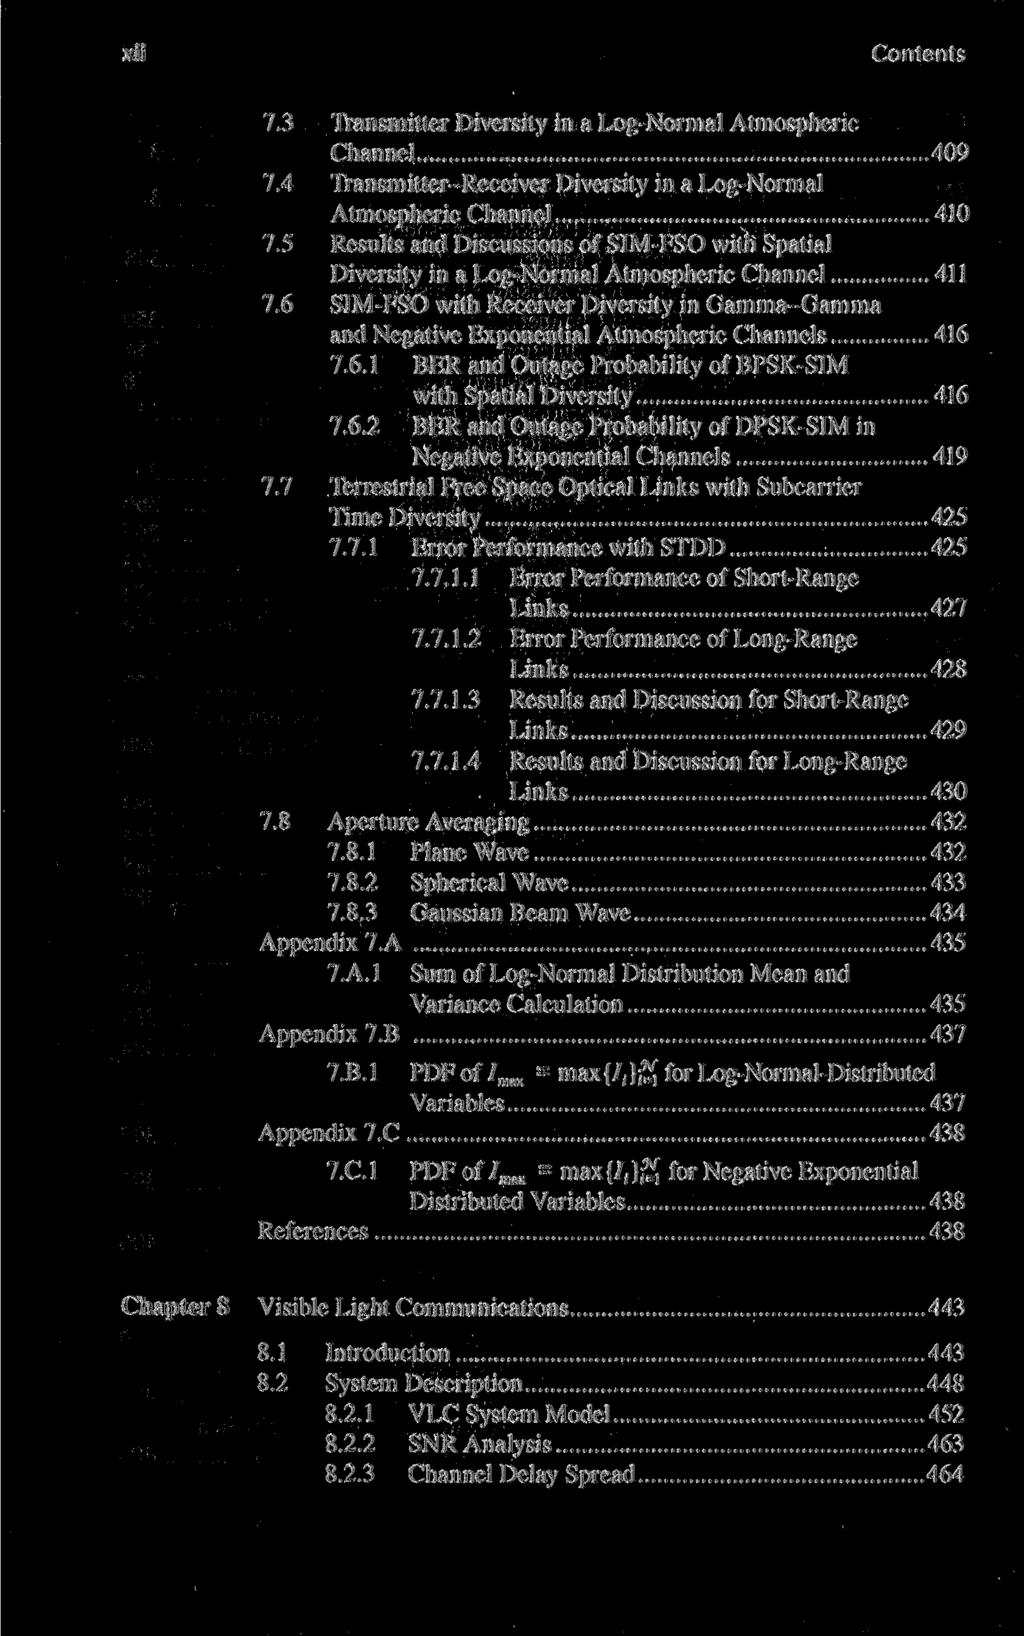 xii Contents 7.3 Transmitter Diversity in a Log-Normal Atmospheric Channel 409 7.4 Transmitter-Receiver Diversity in a Log-Normal Atmospheric Channel 410 7.